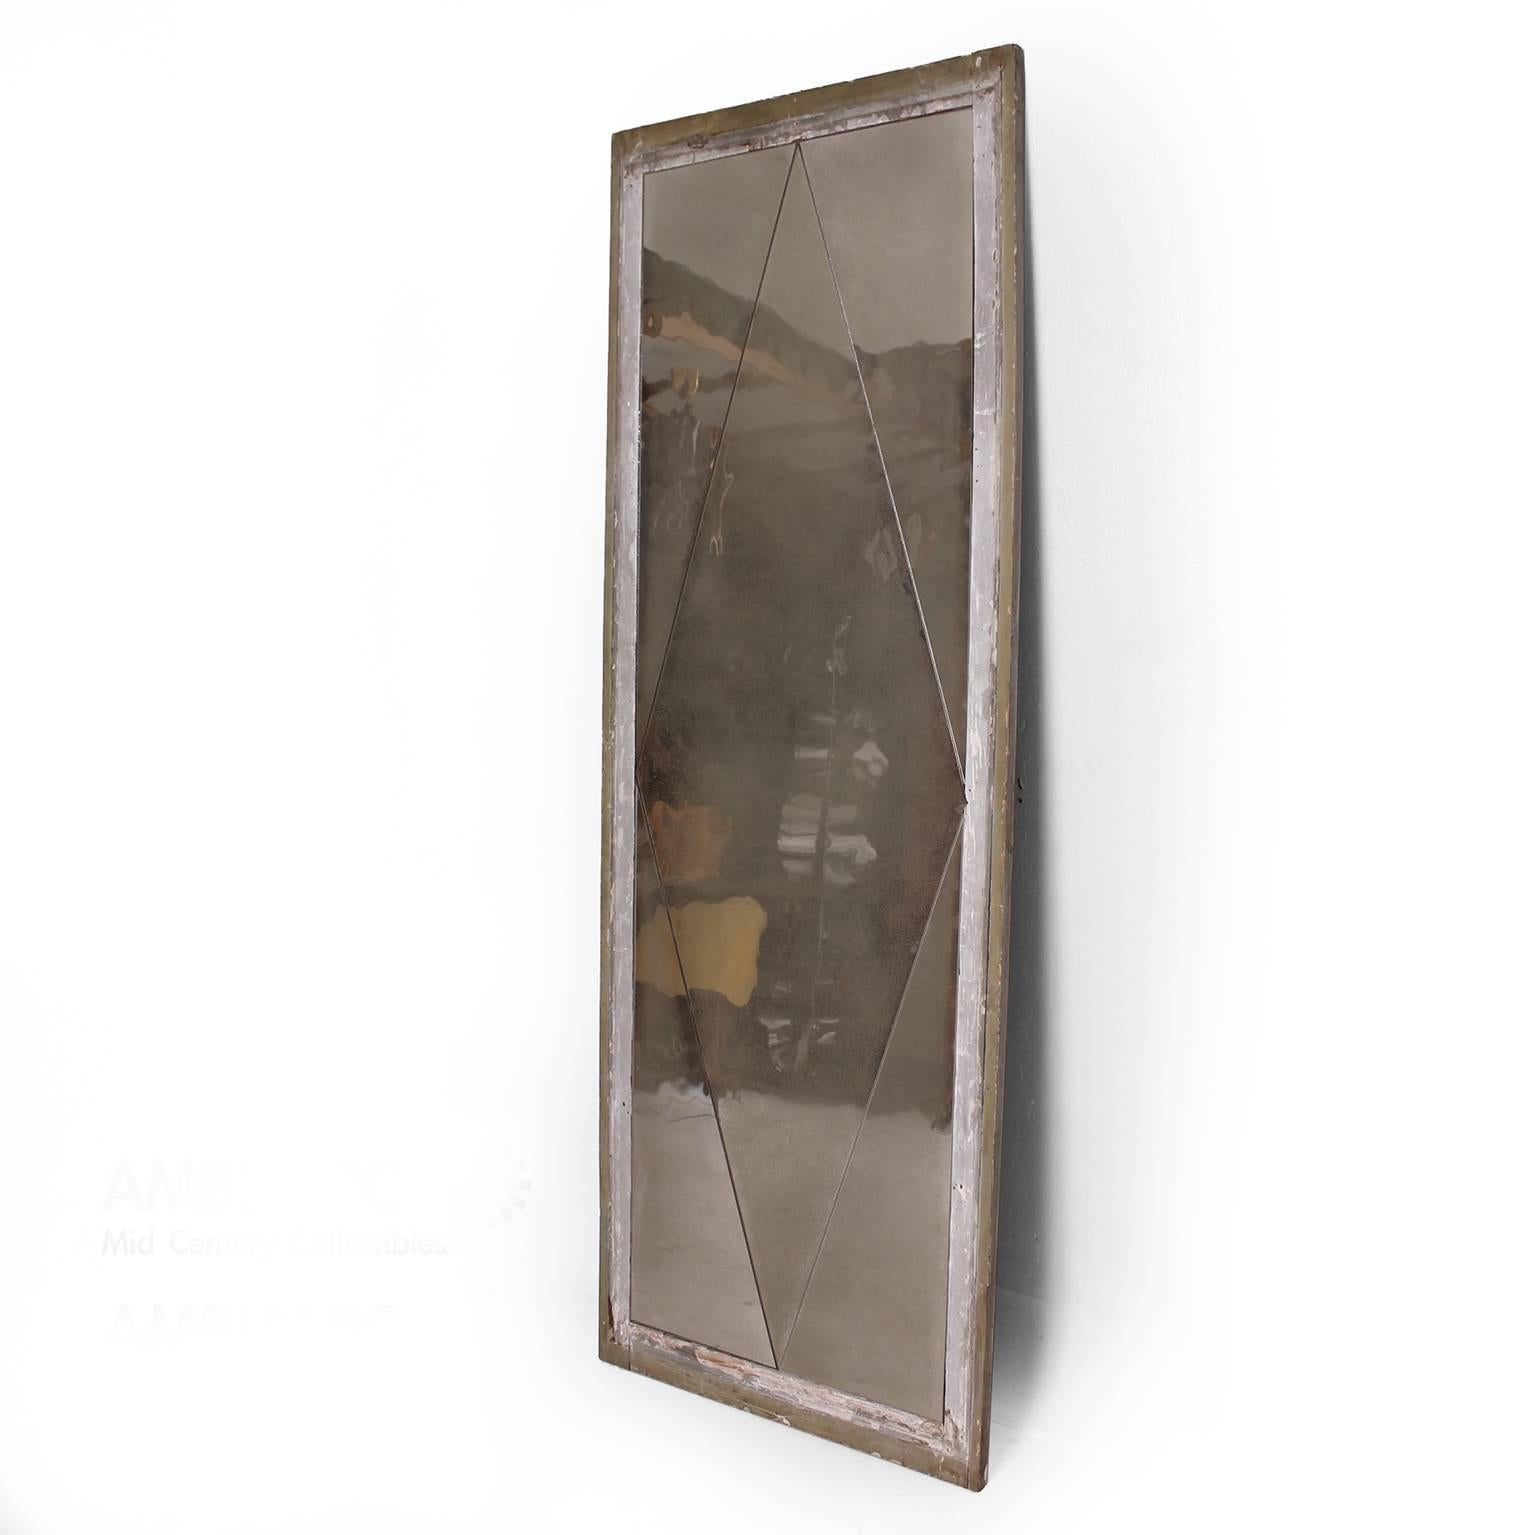 Beautiful distressed floor mirror with diamond pattern - cut.
Original antique condition.
Made in France, circa 1940s. 
Dimensions: 81